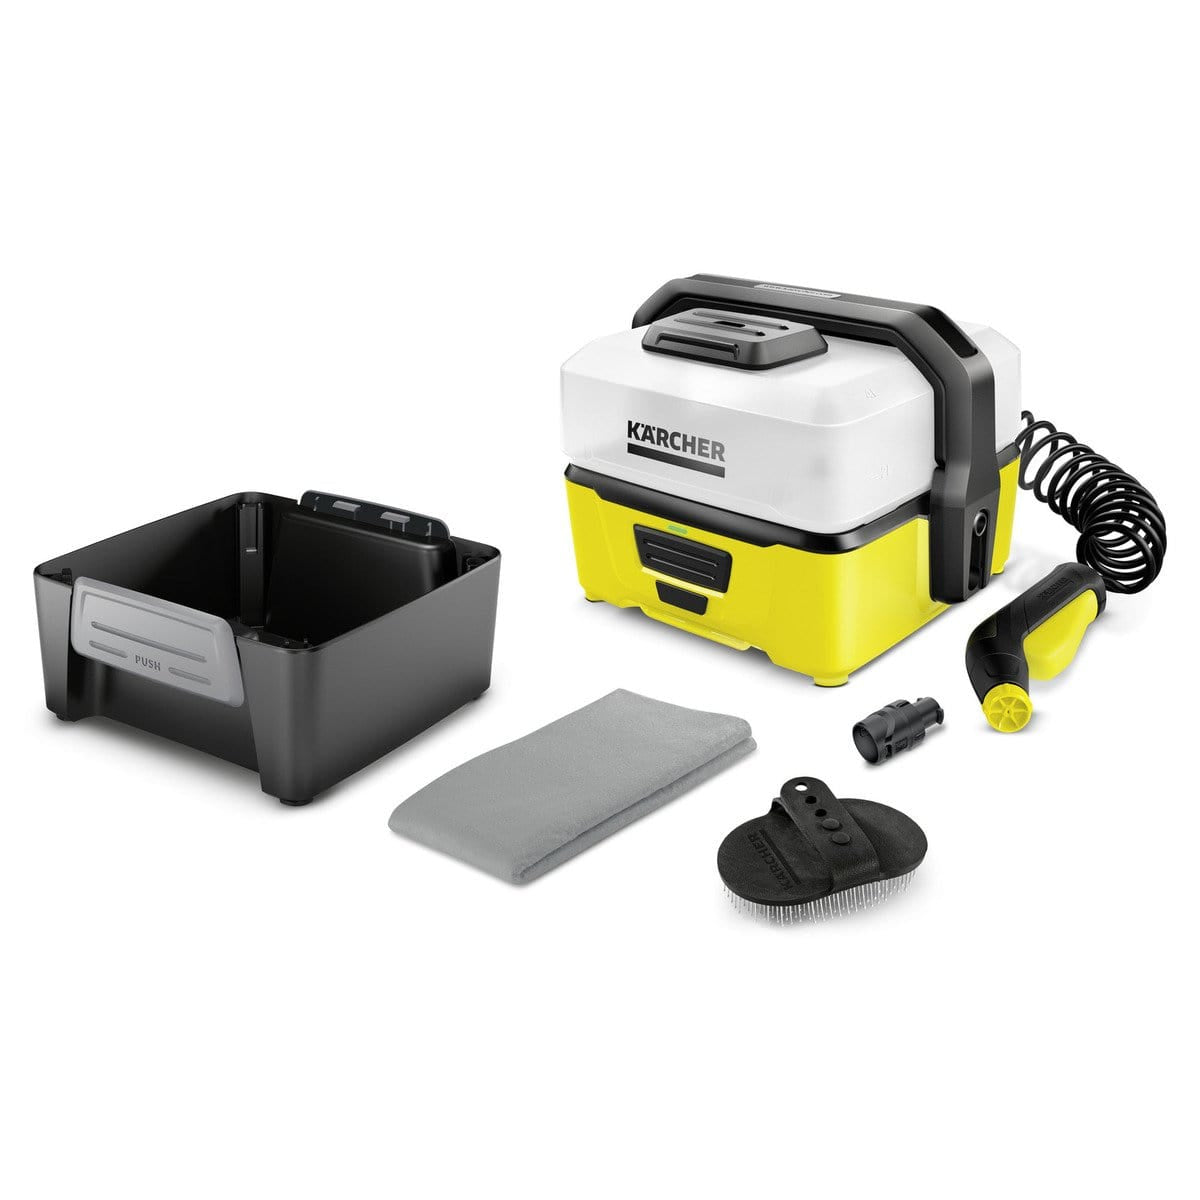 Karcher Mobile Outdoor Cleaner OC 3 + Pet Box | Supply Master | Accra, Ghana Tools Building Steel Engineering Hardware tool